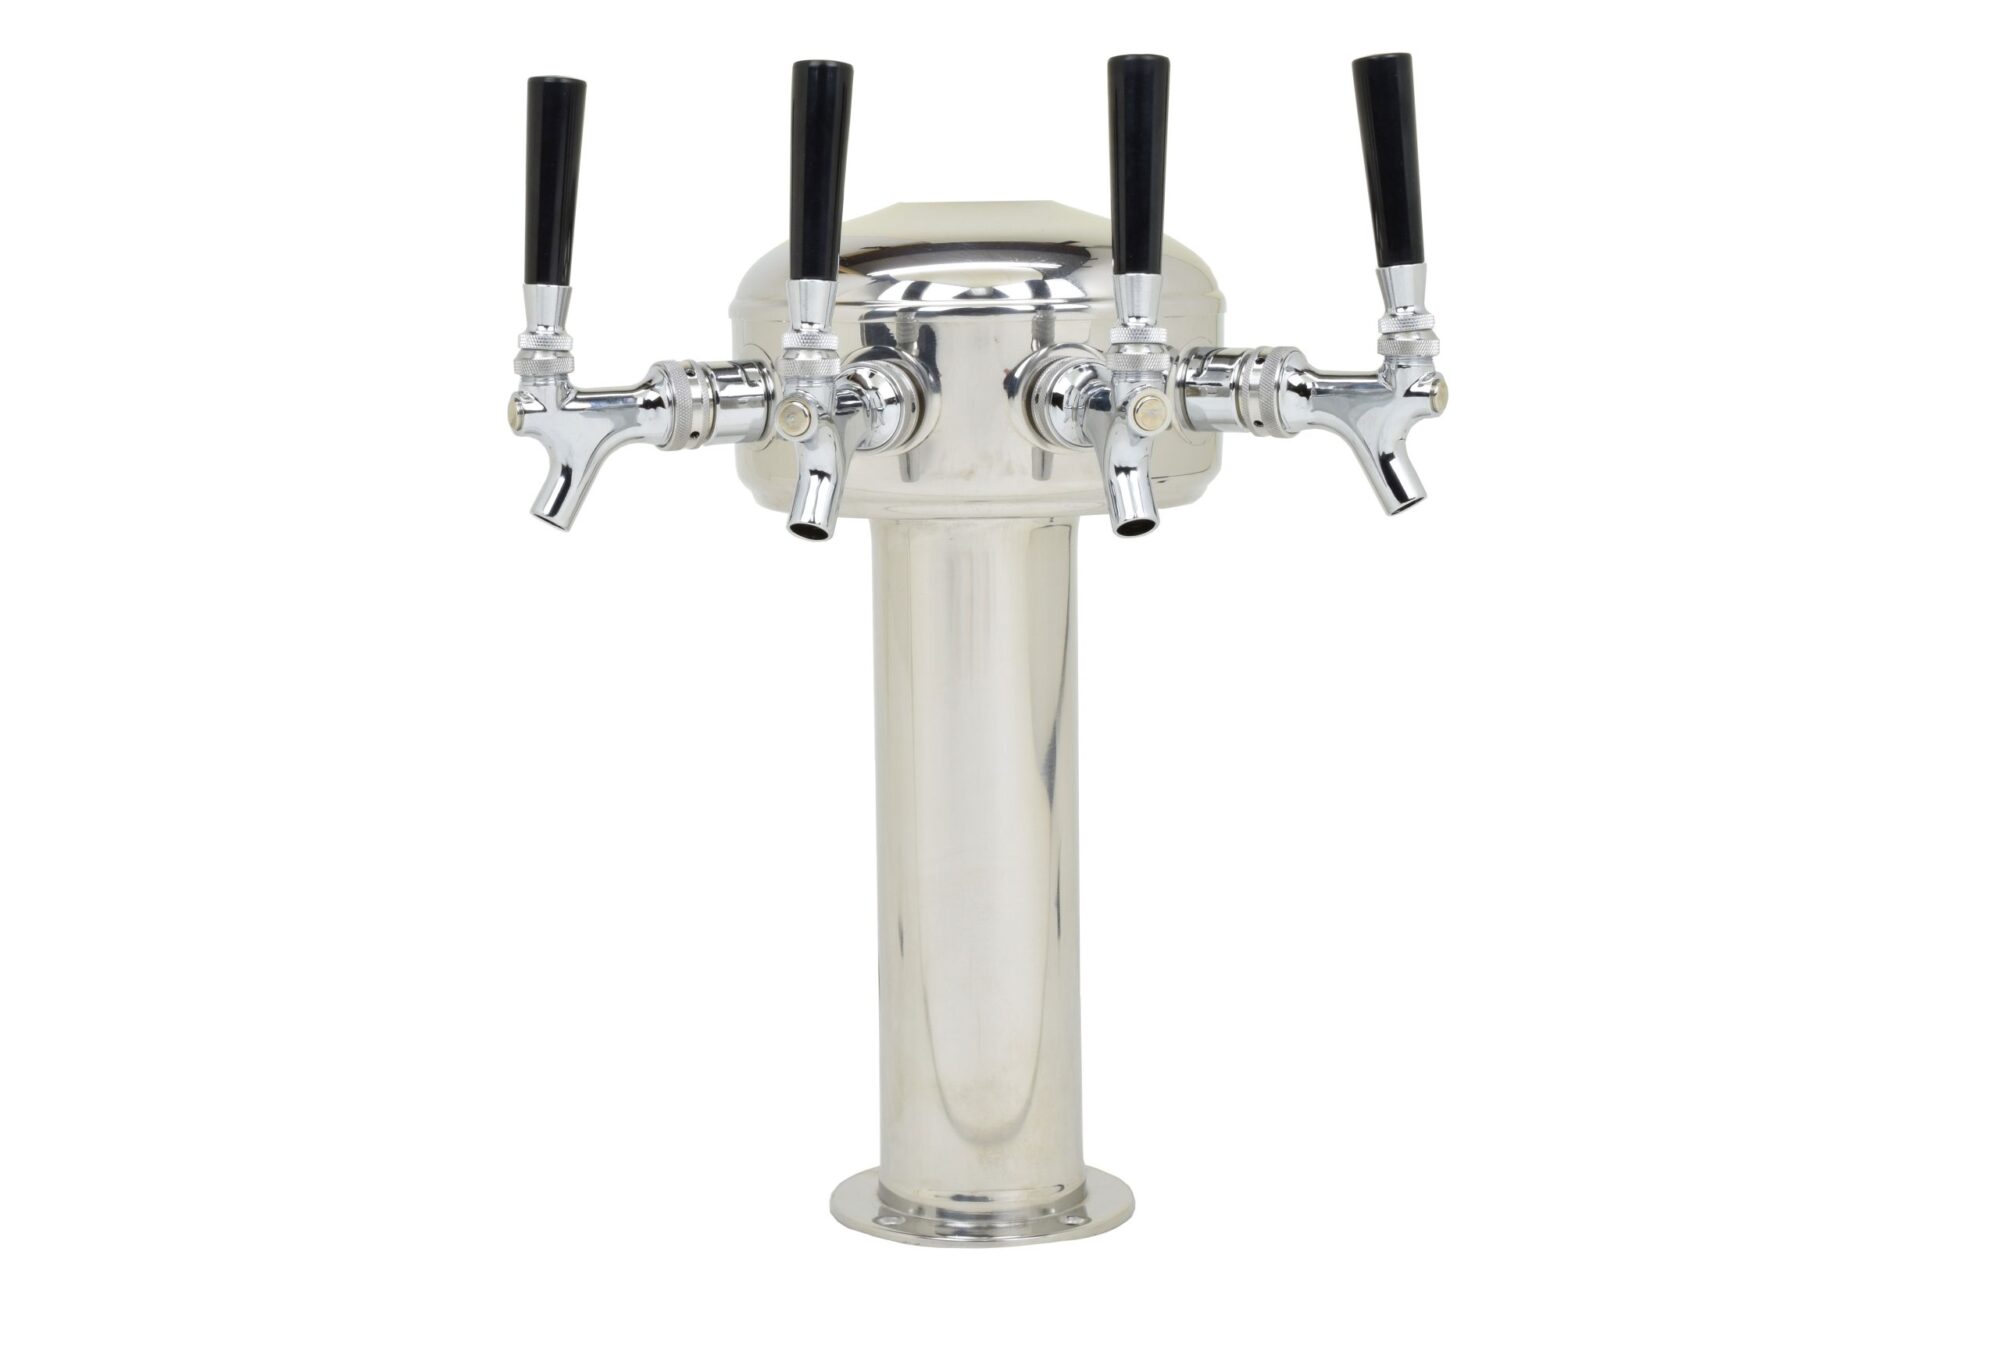 626CG-4front Four Faucet Mini Mushroom Tower with Chrome Plated Faucets and Shanks - Glycol Ready